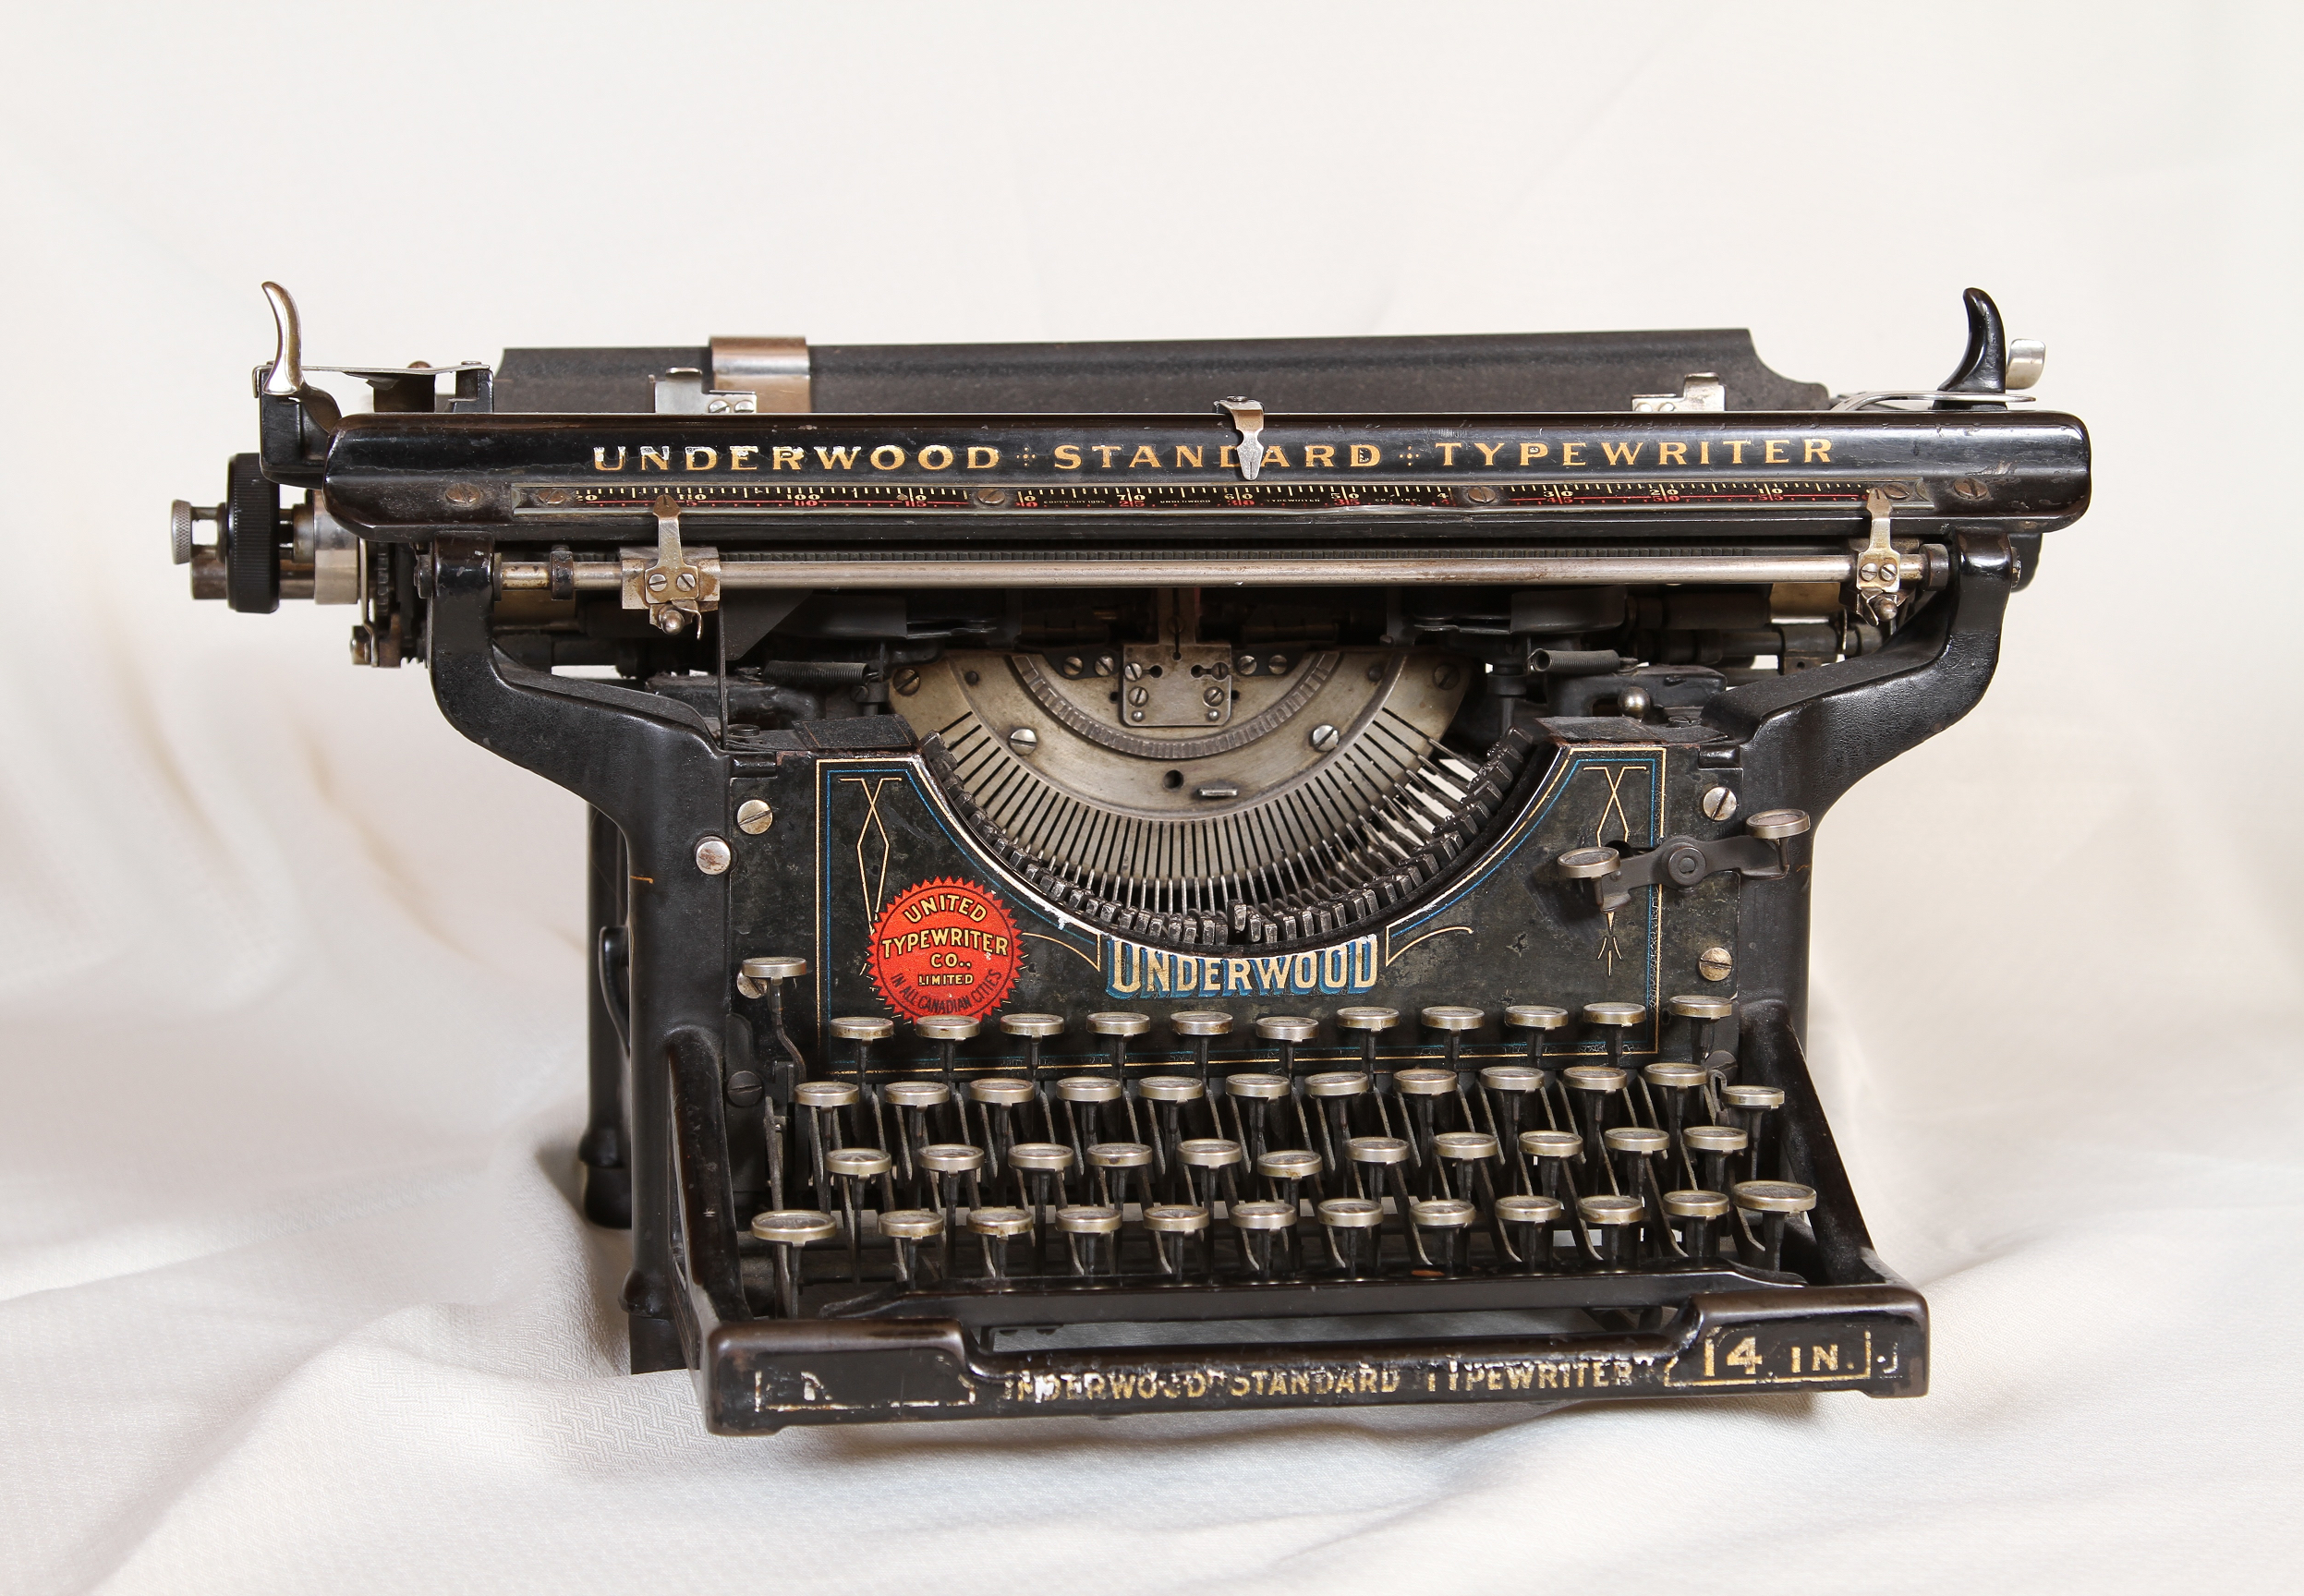 A photograph of an old typewriter.